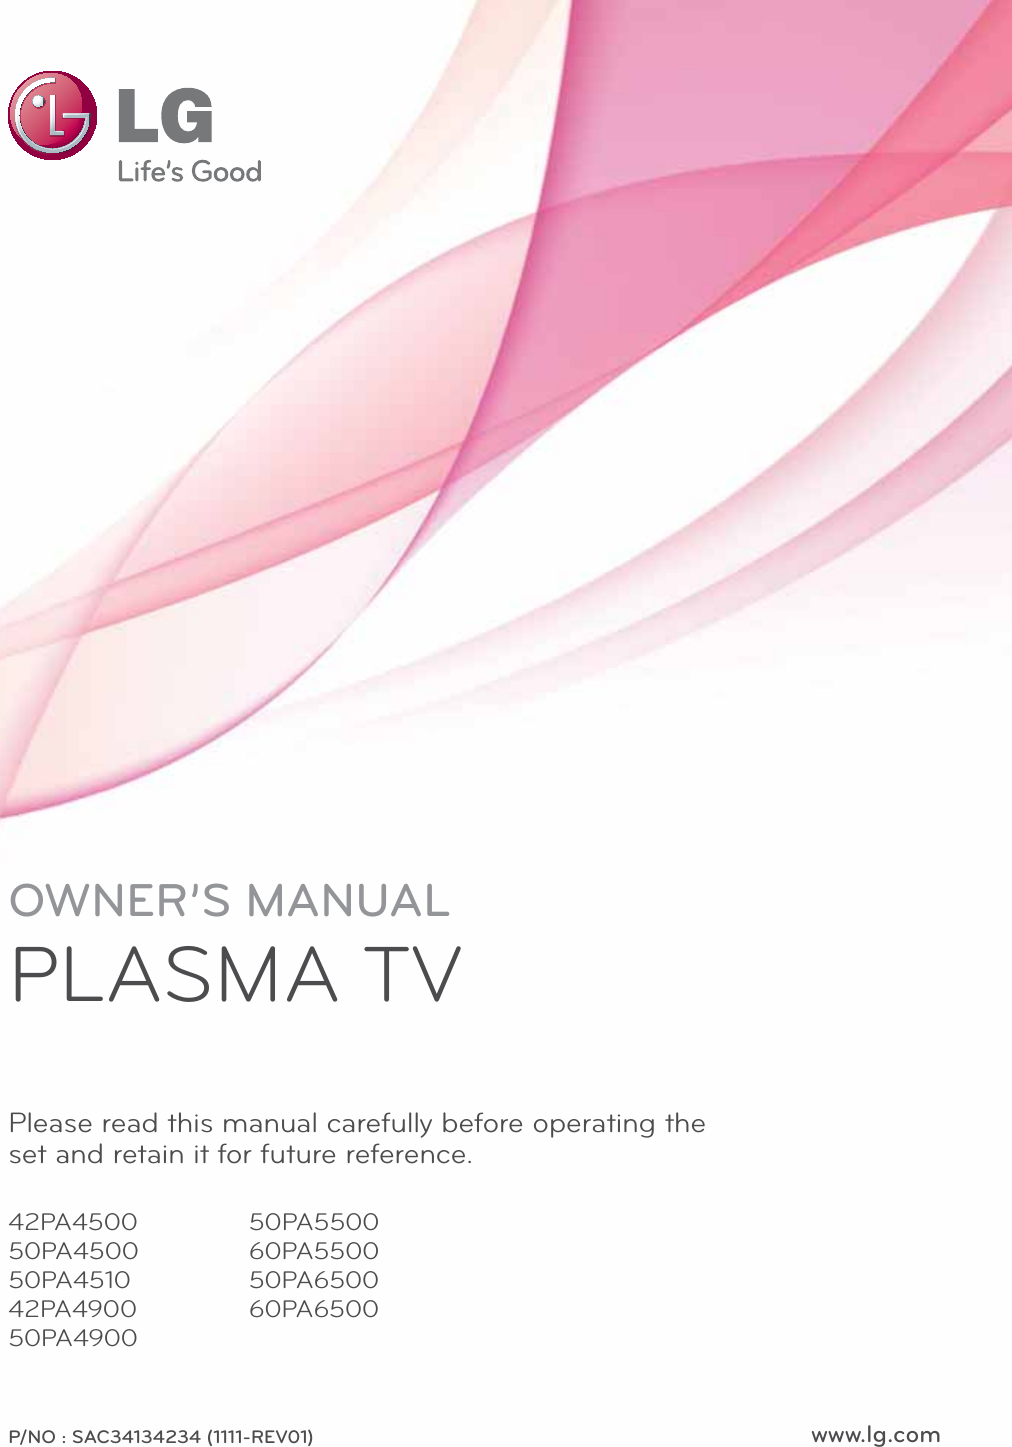 www.lg.comP/NO : SAC34134234 (1111-REV01)OWNER’S MANUALPLASMA TVPlease read this manual carefully before operating the set and retain it for future reference.42PA450050PA450050PA451042PA490050PA490050PA550060PA550050PA650060PA6500